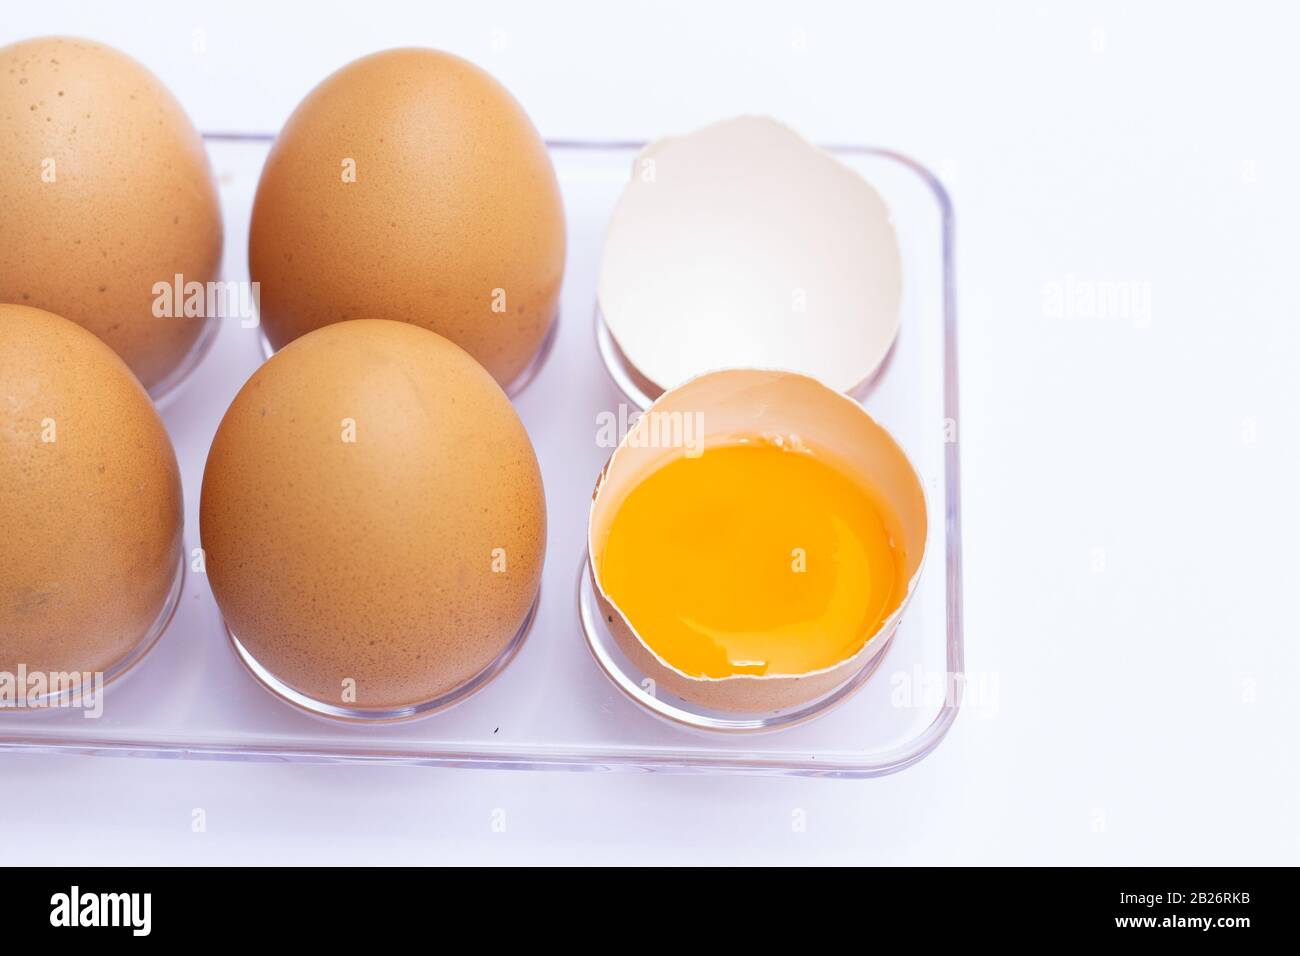 Four brown eggs lay on an egg tray with an eggshell on a white background. There was a broken egg, showing the yolk inside. Stock Photo